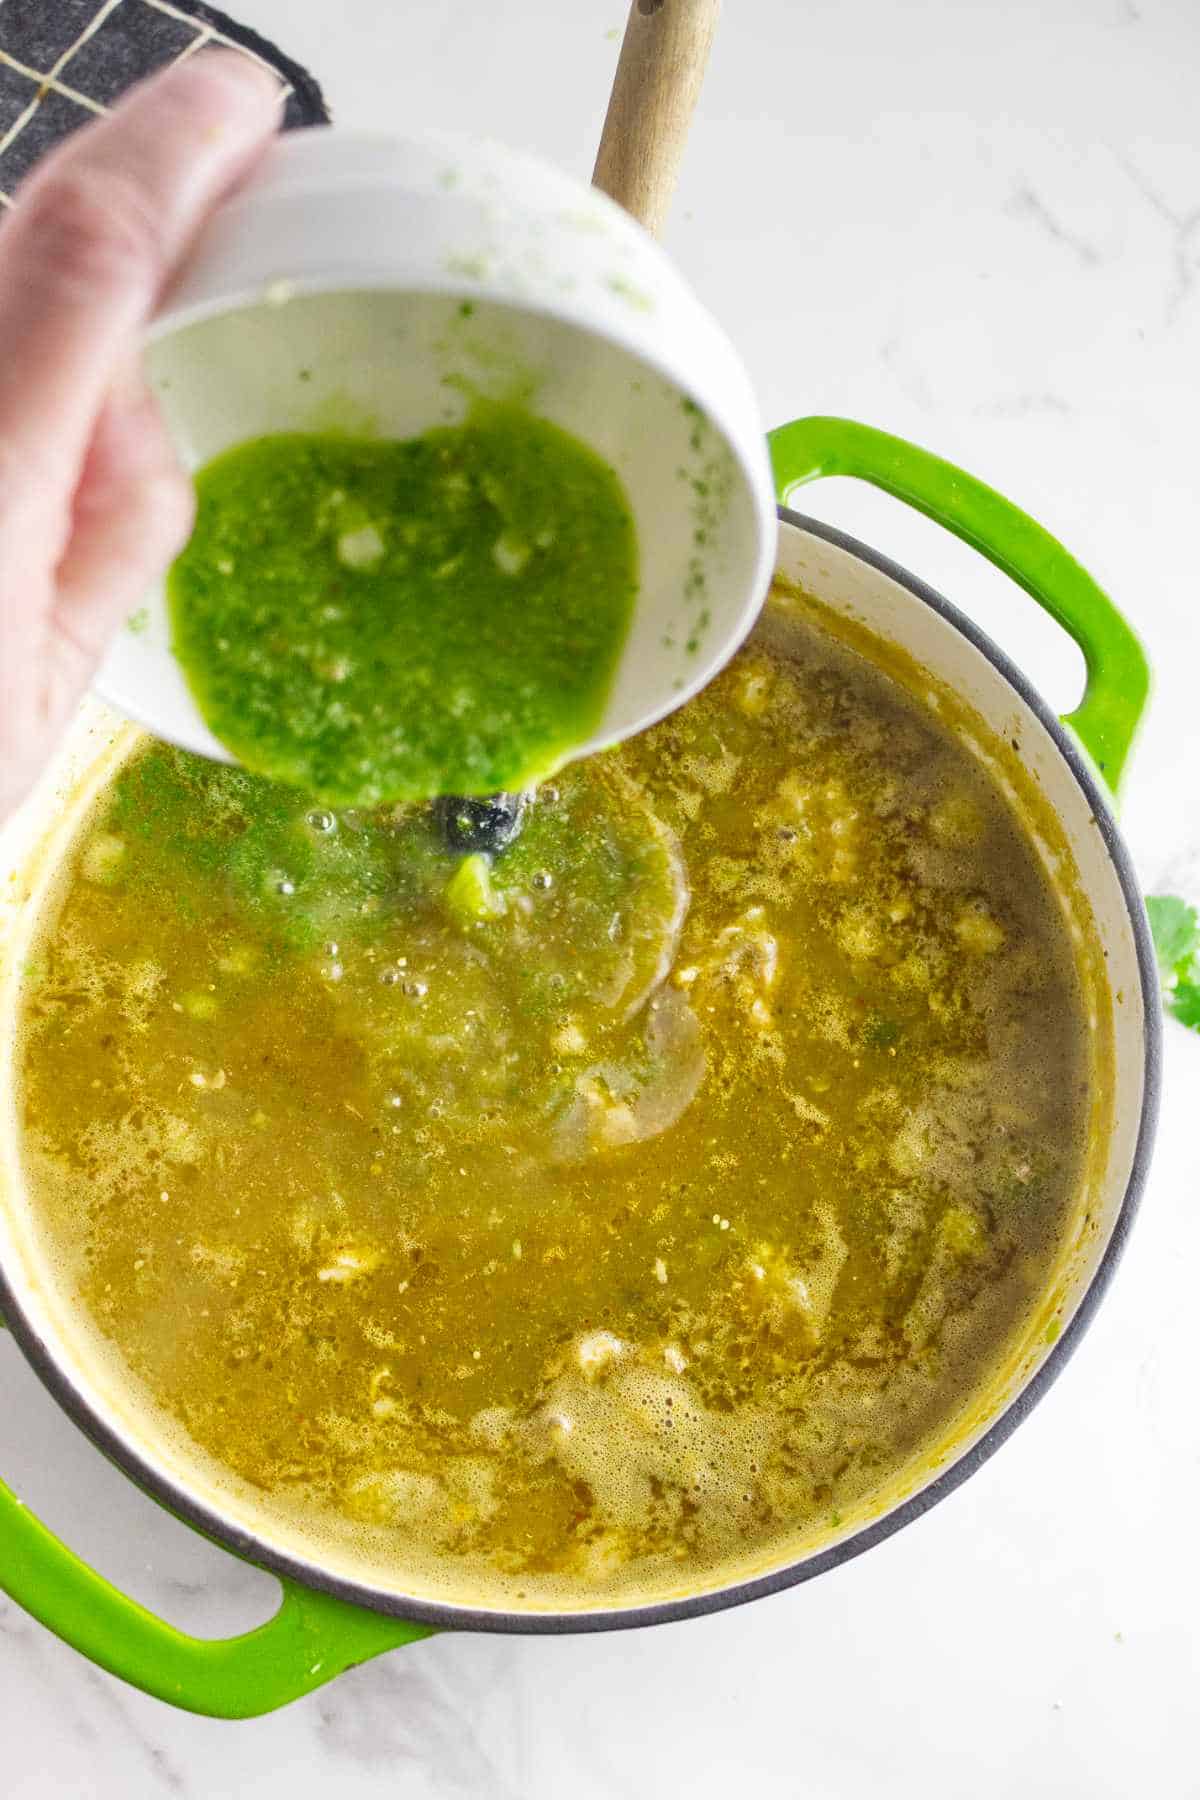 hominy thickener added to pot of pork pozole verde.